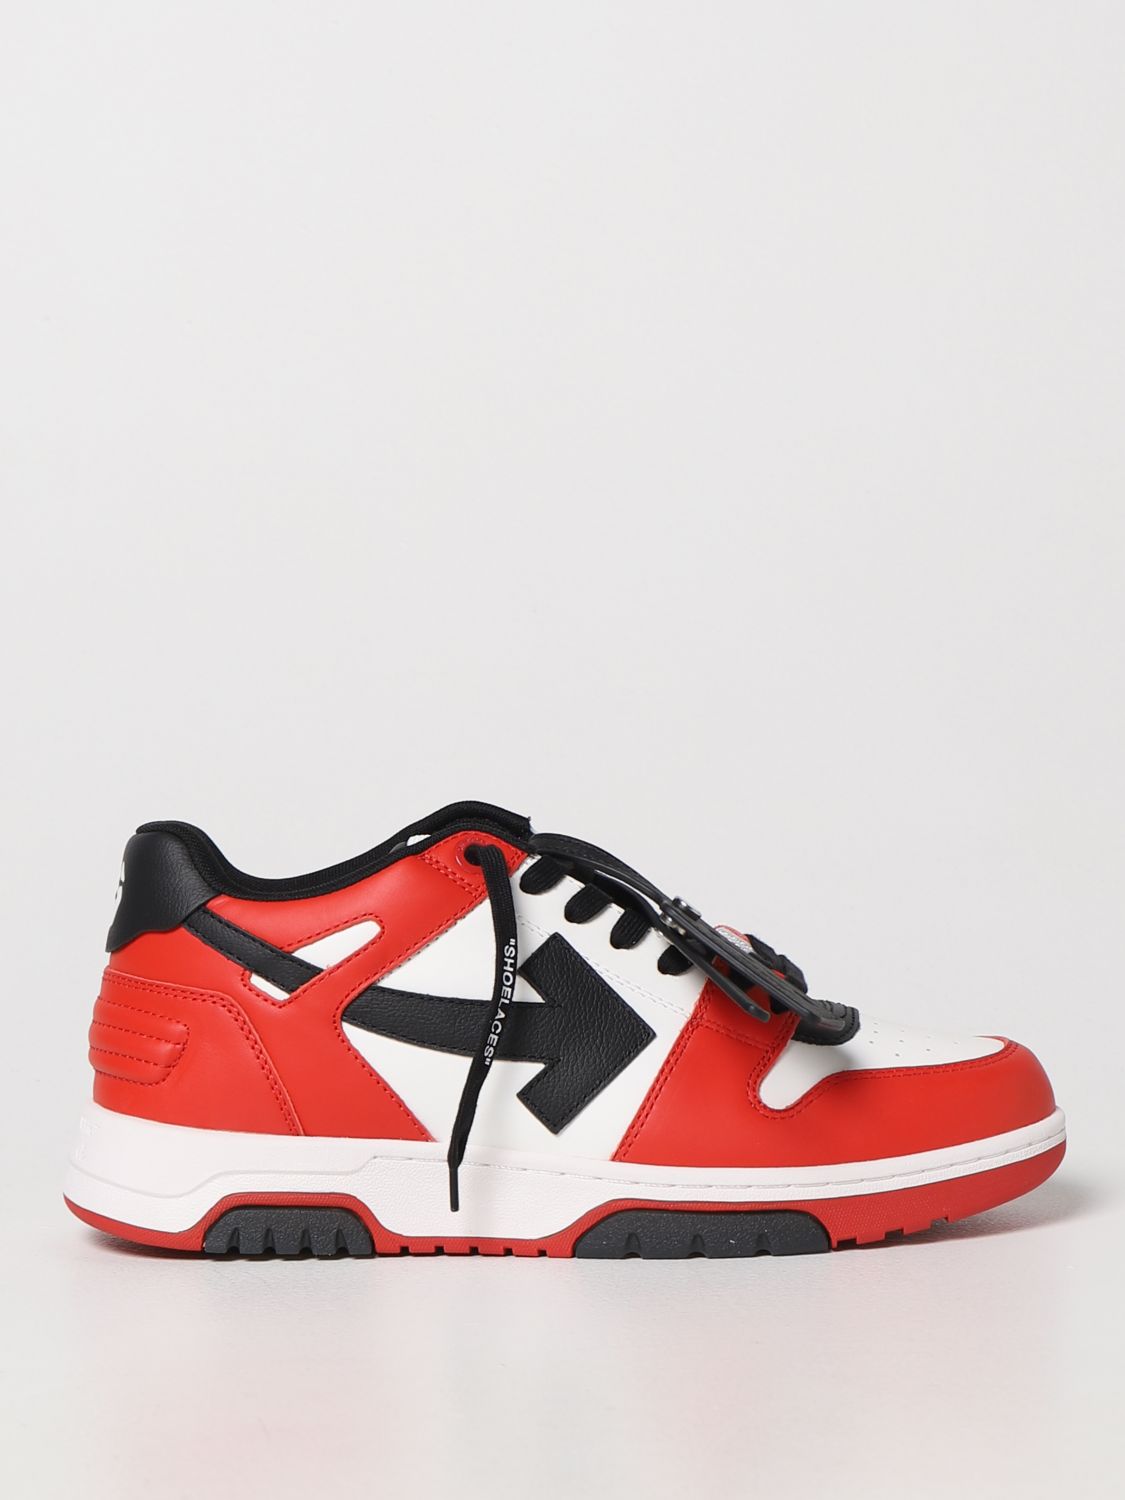 Nike x Off-White Shoes for Women - Vestiaire Collective